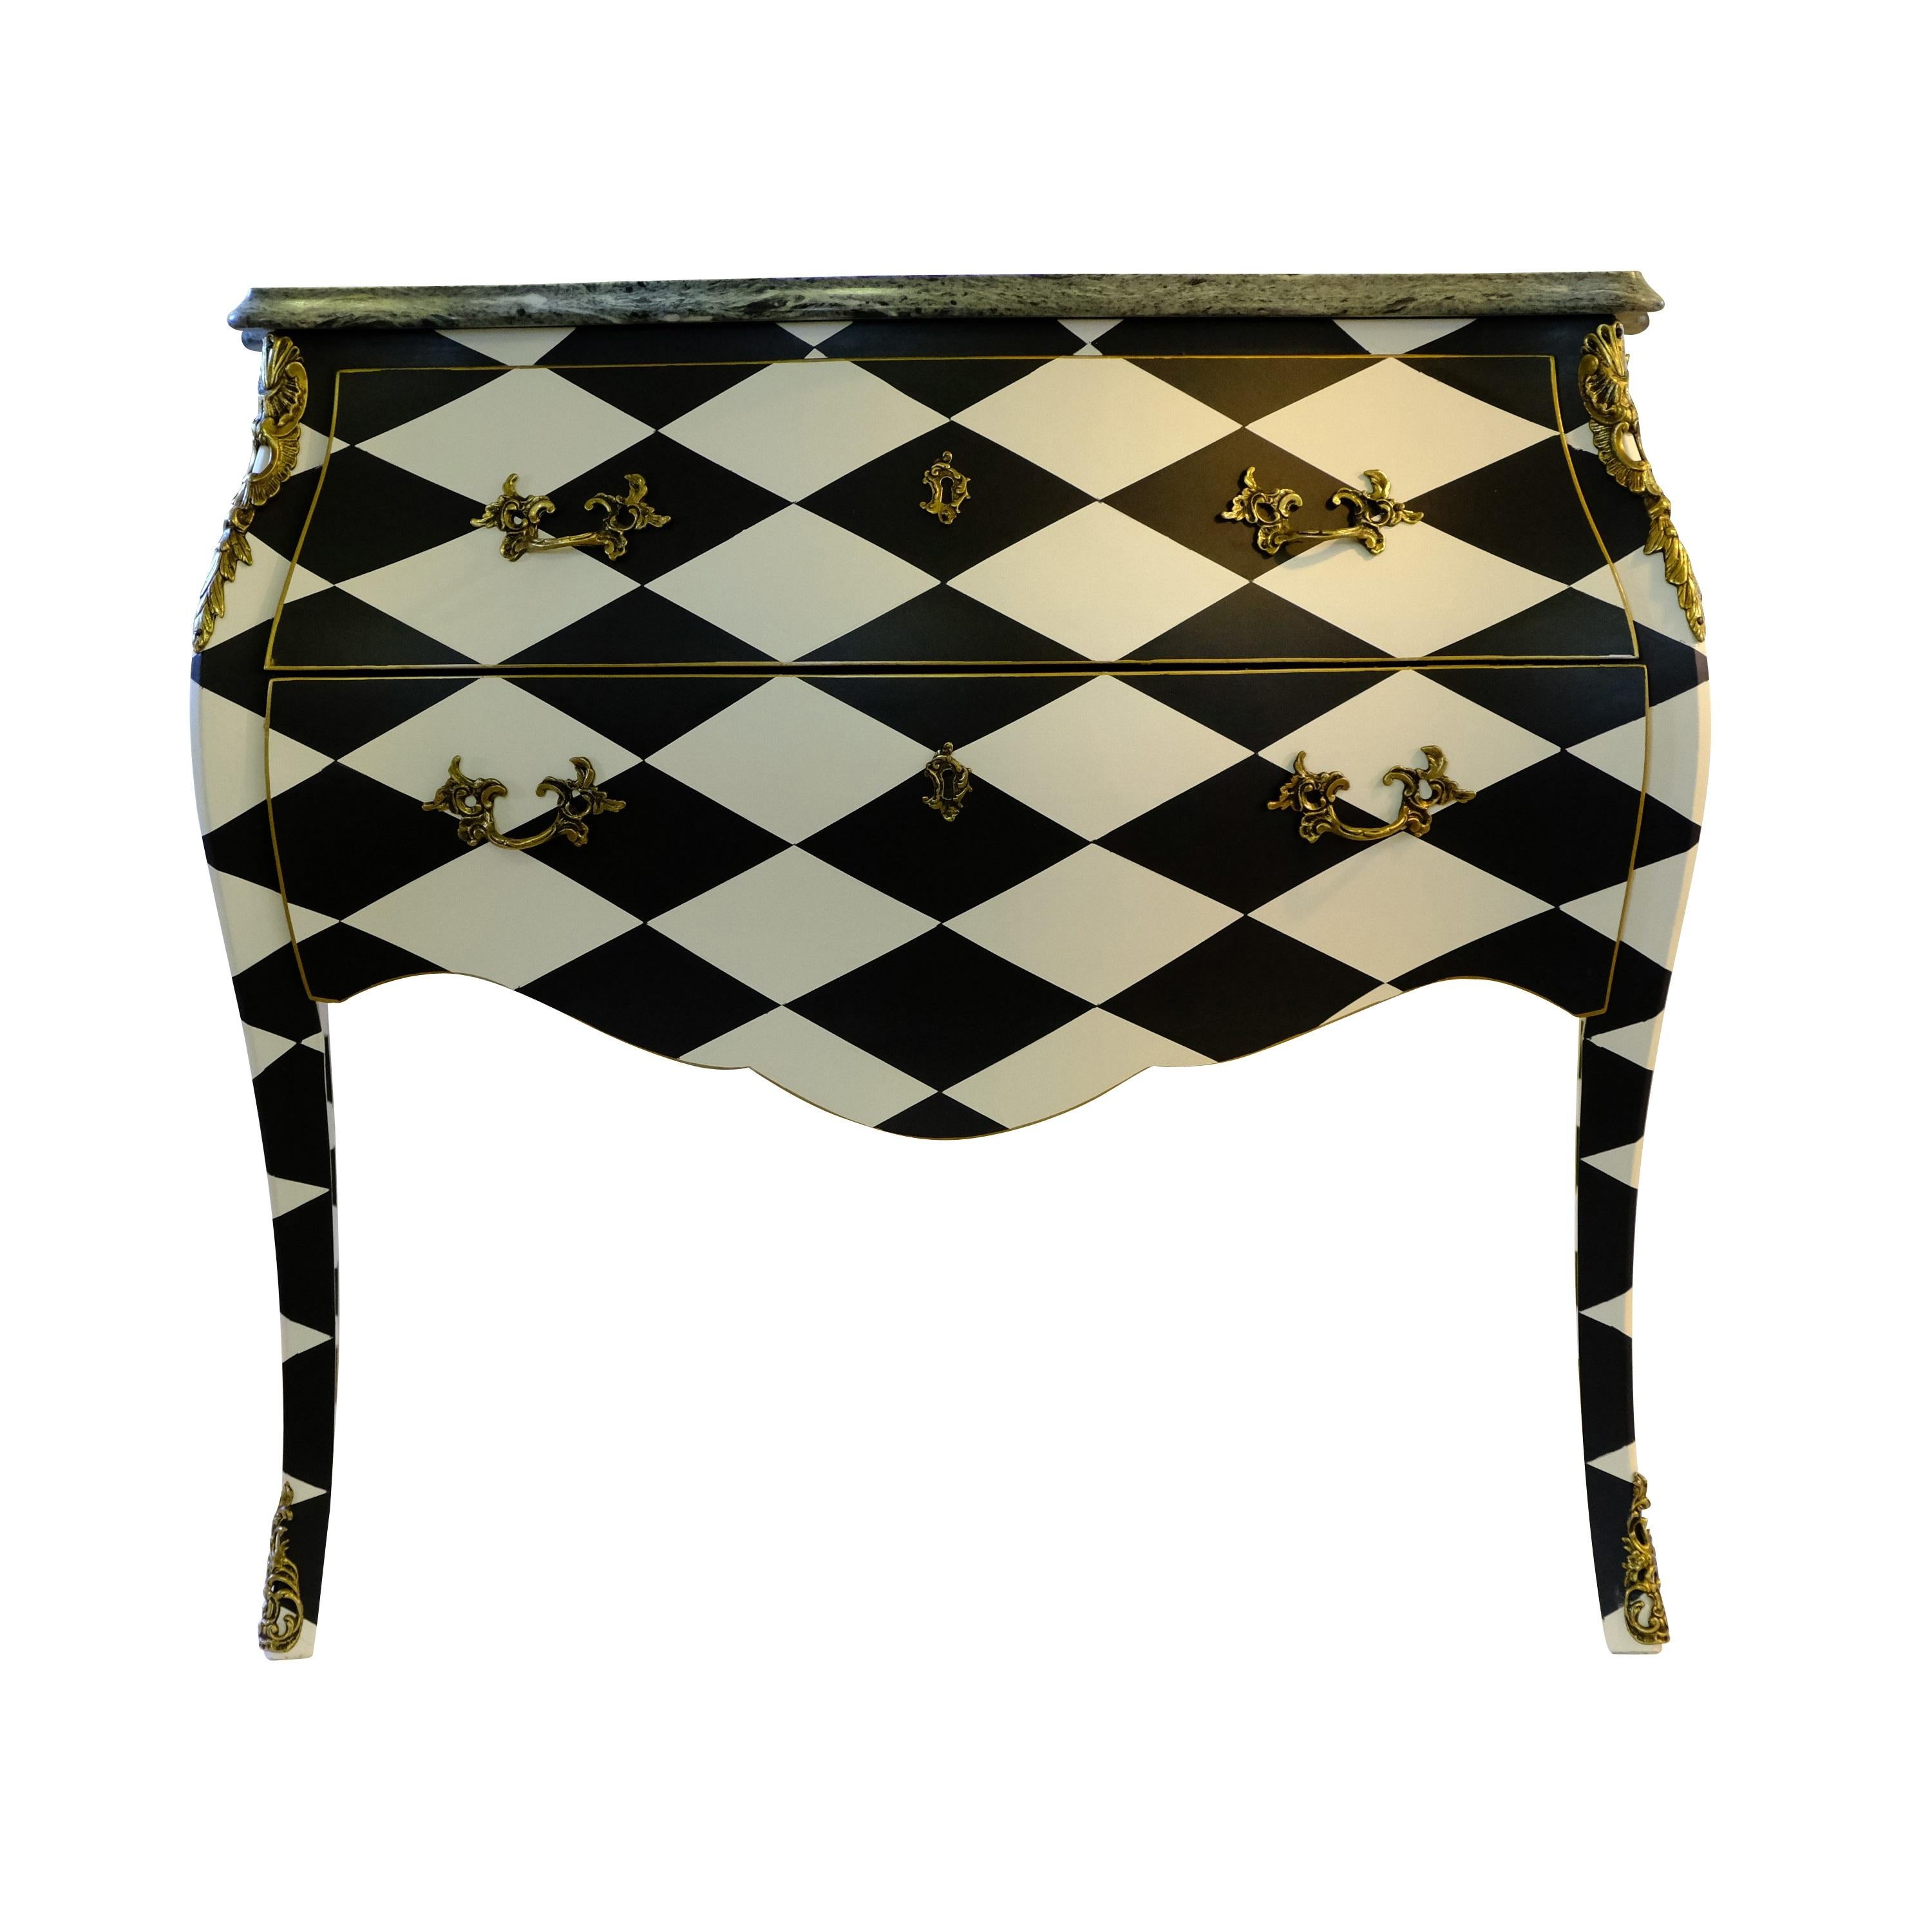 A Louis XV style commode from the early 19th century renovated to the highest standard with a harlequin pattern. Original cast brass metal fittings and marble top. 2 drawers. 
Measures: Width: 83cm / 32.7